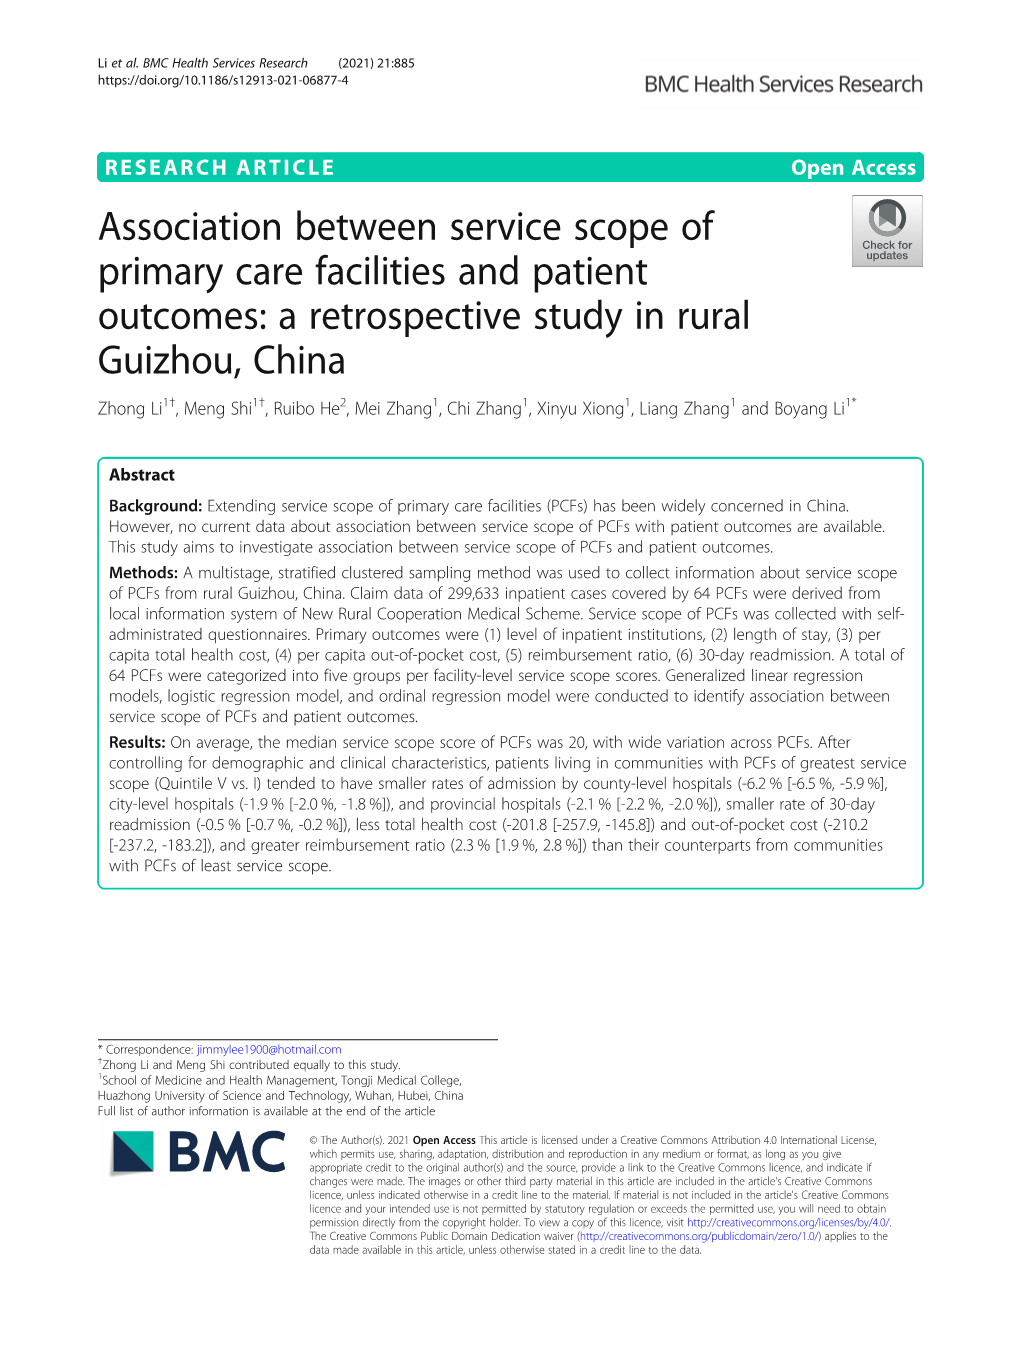 Association Between Service Scope of Primary Care Facilities and Patient